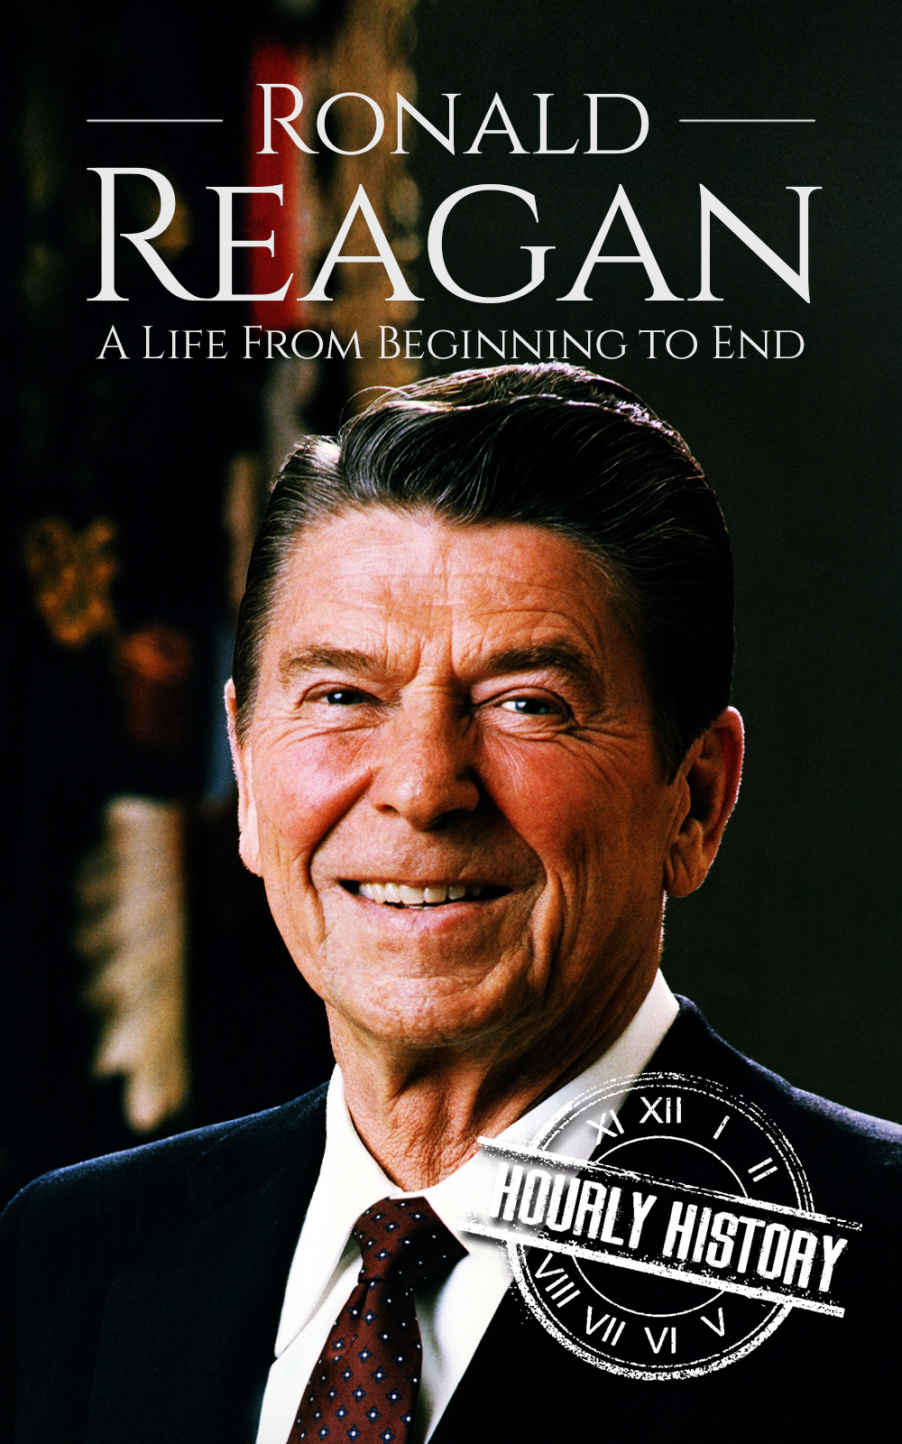 Ronald Reagan: A Life From Beginning to End (Biographies of US Presidents)